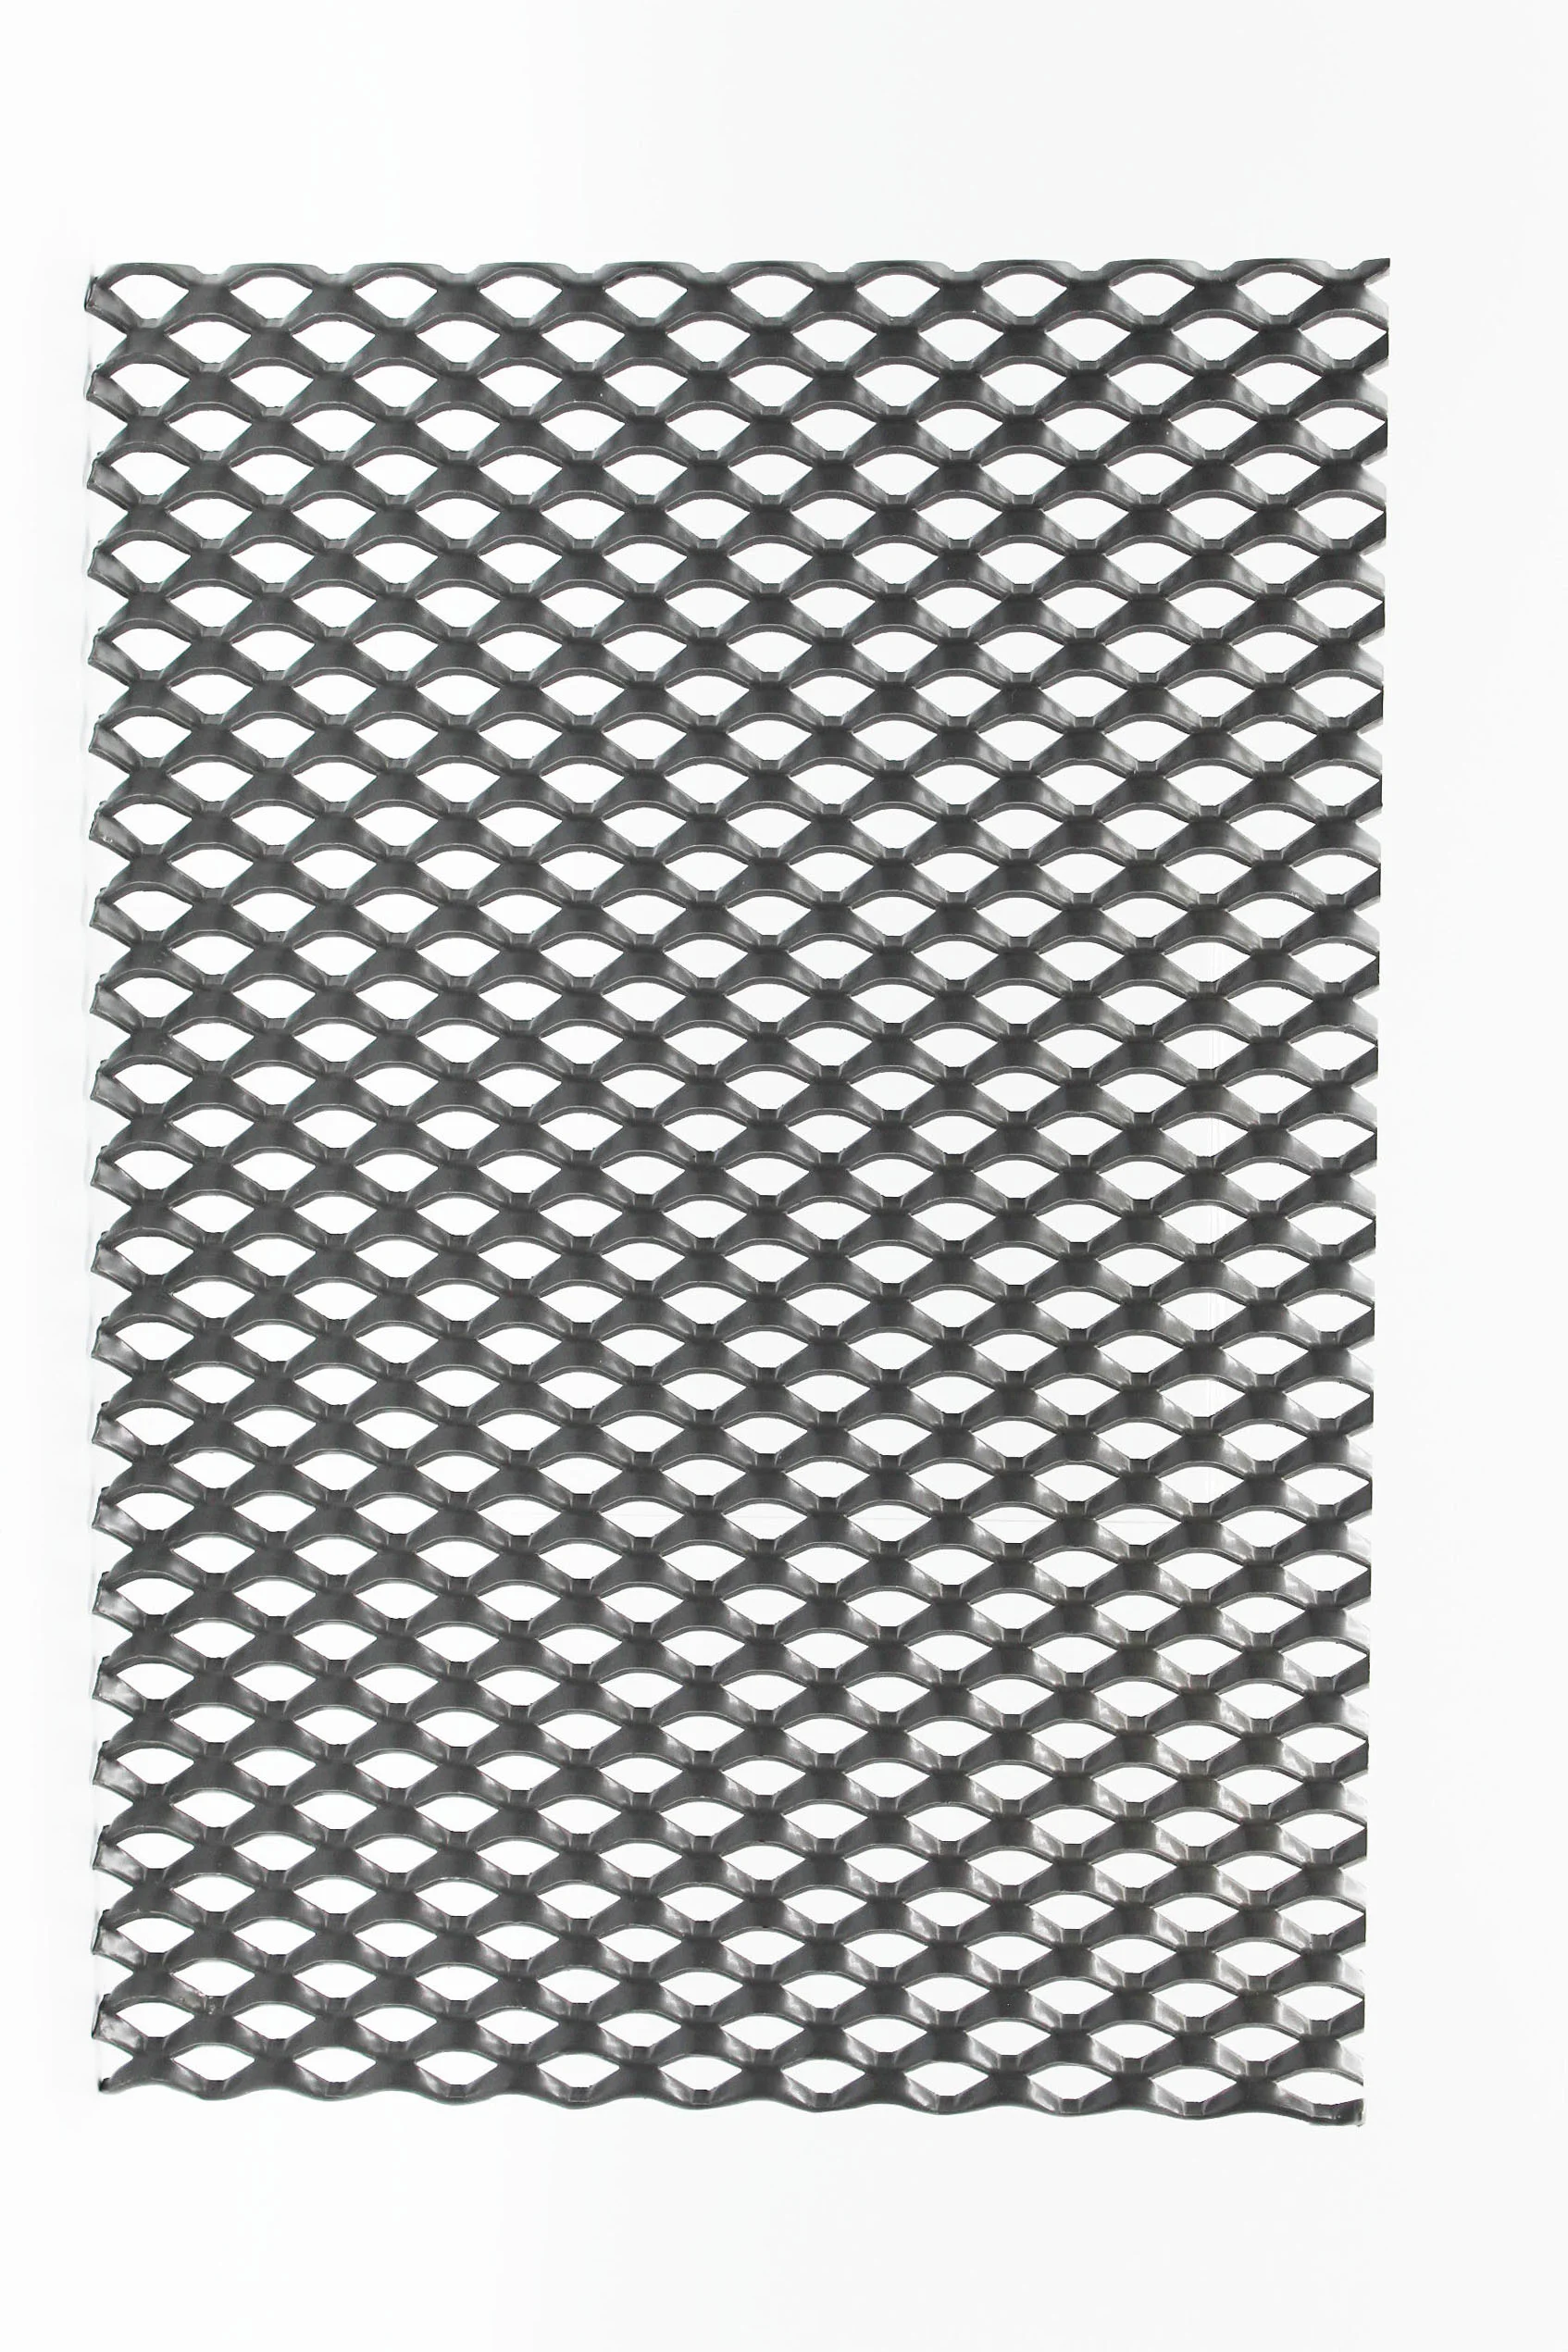 Soho XL grey expanded architectural mesh